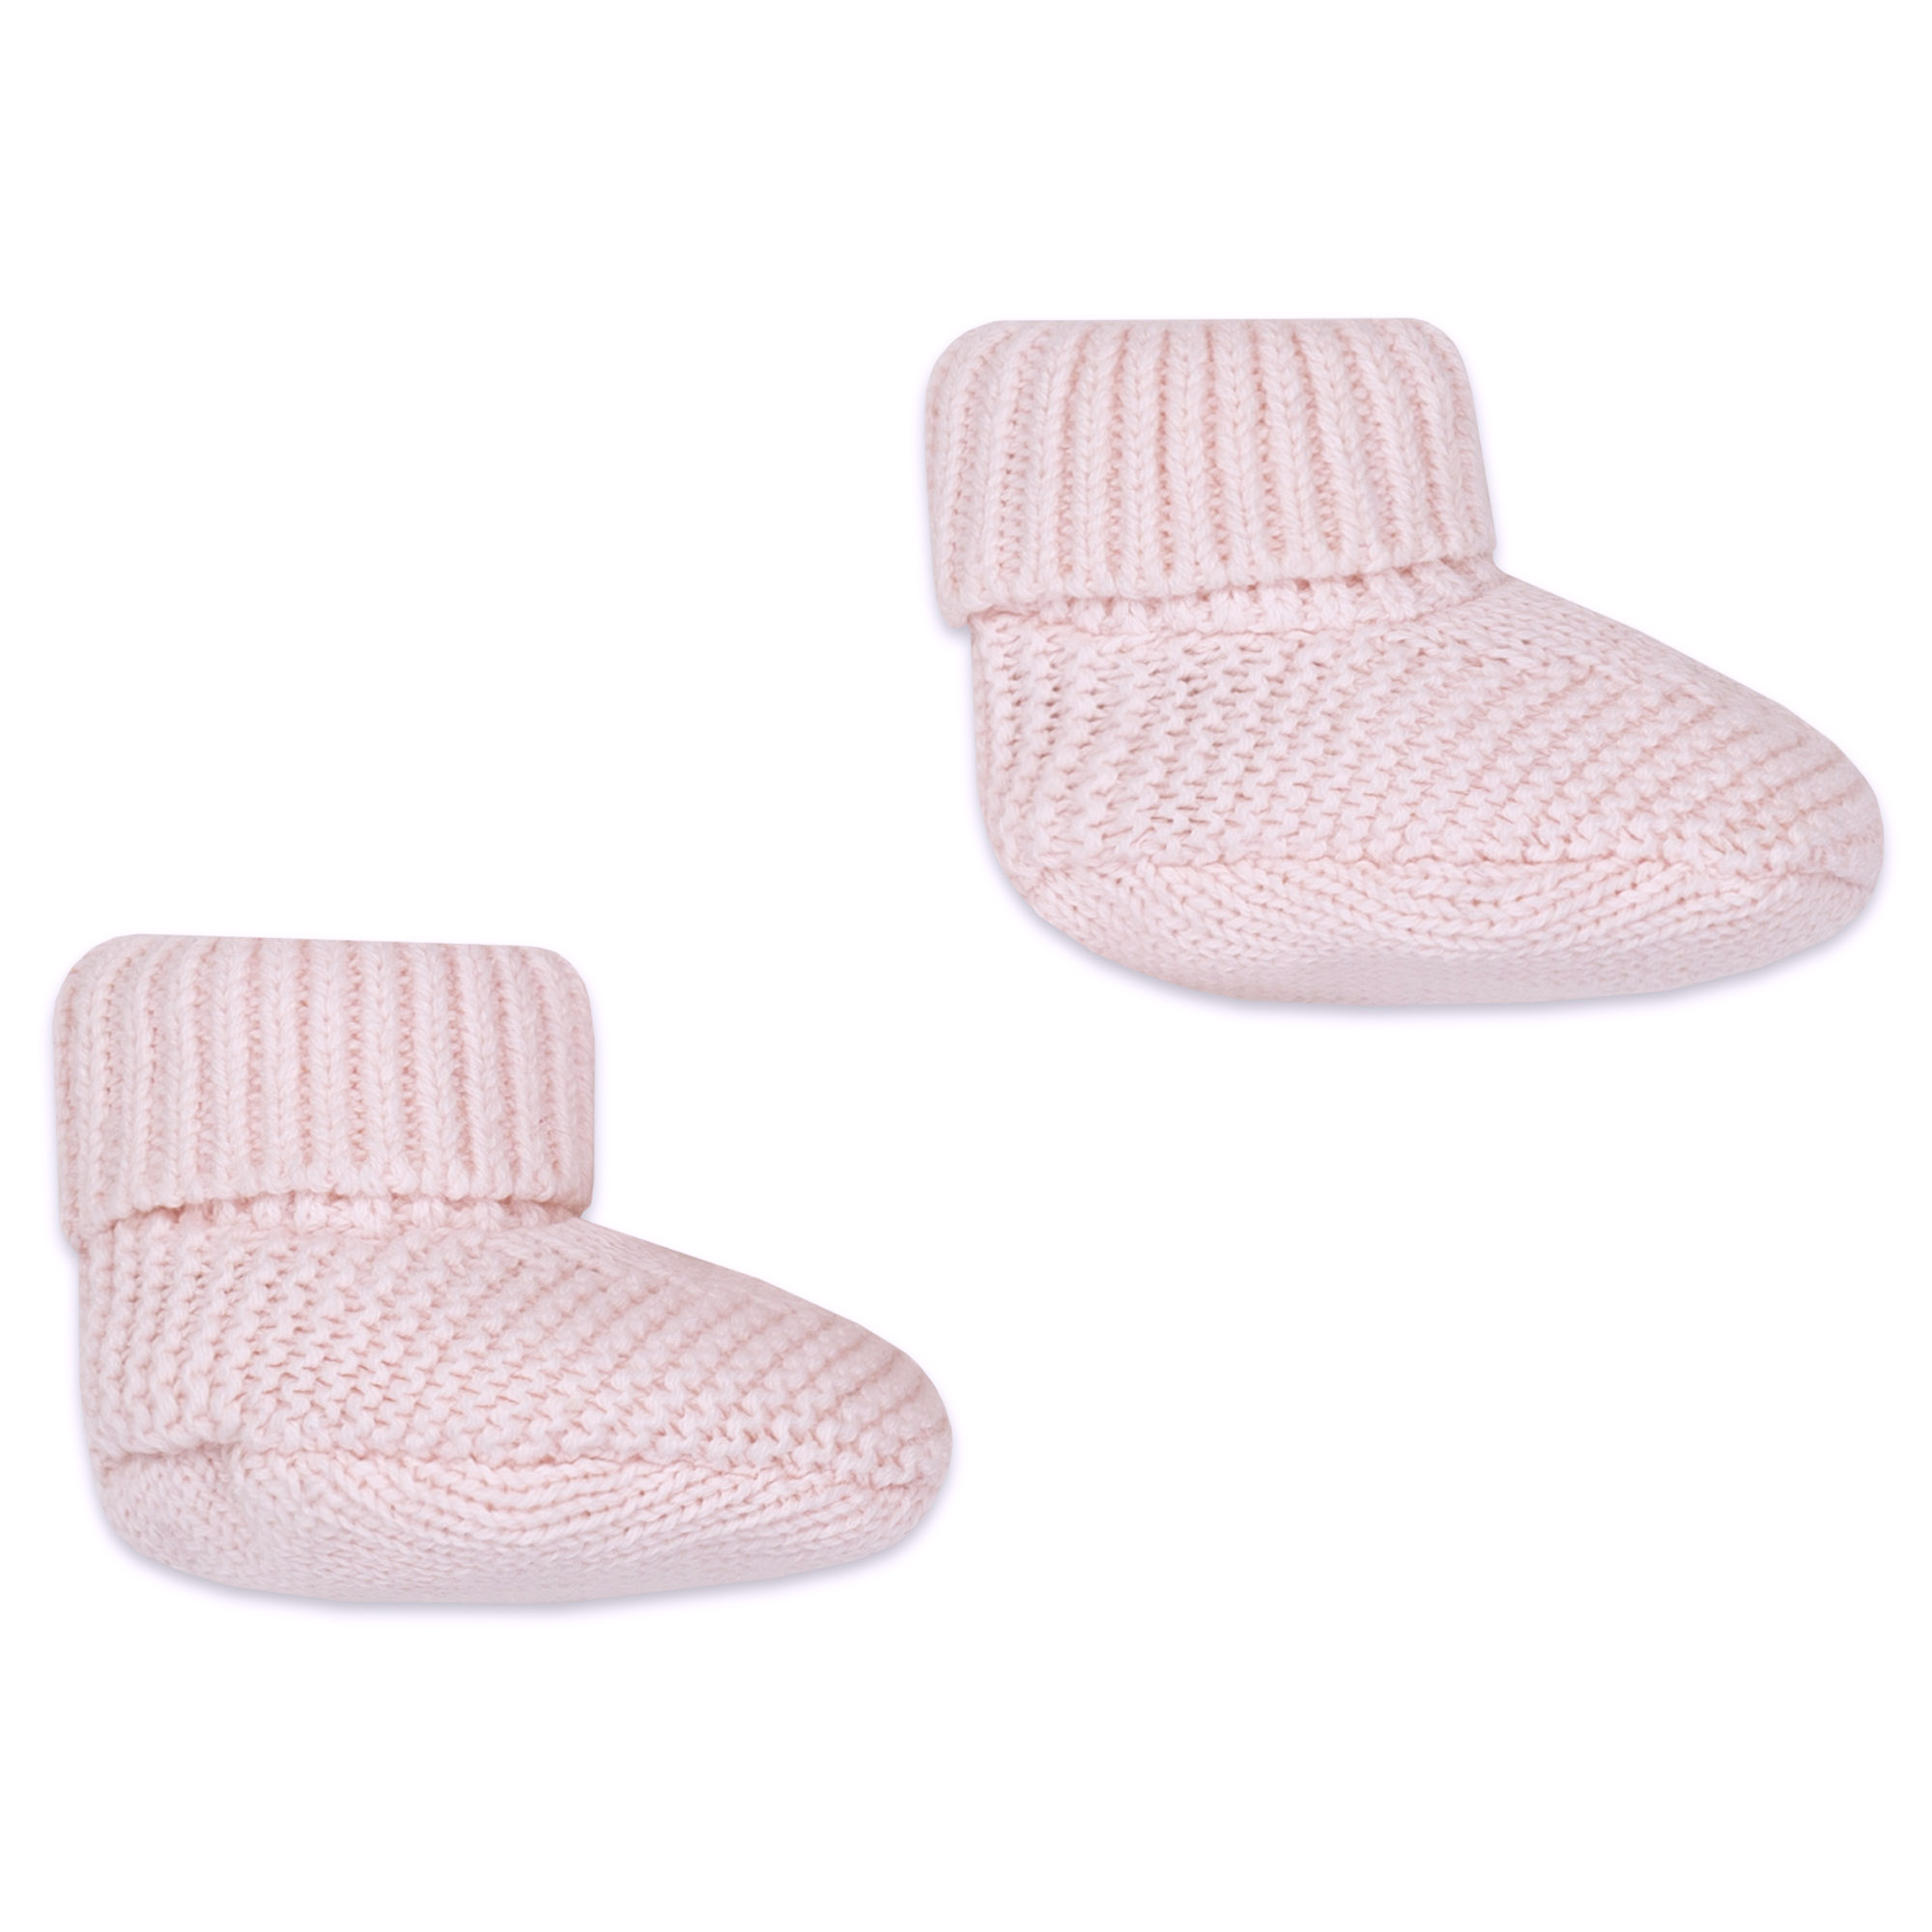 Knitted hat and booties CARREMENT BEAU for GIRL